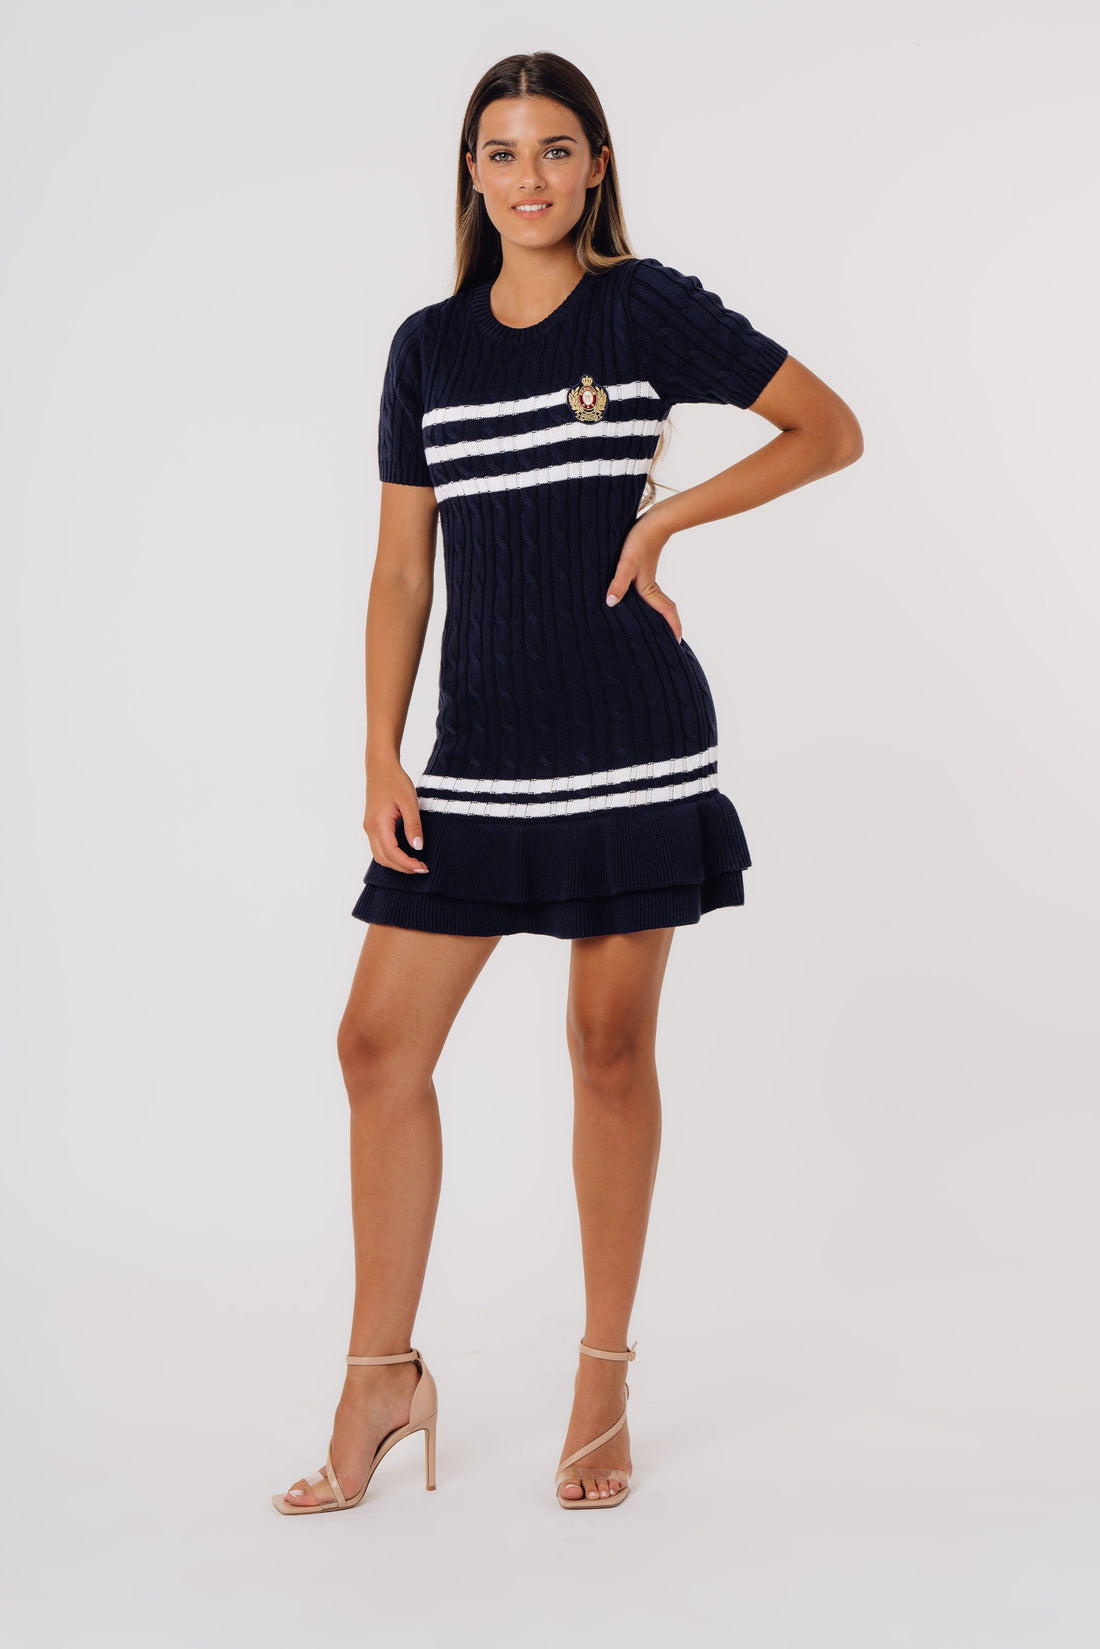 Cable-Knit Short-Sleeve Fit and Flare Ruffle Dress BLUE-WHITE STRIPES